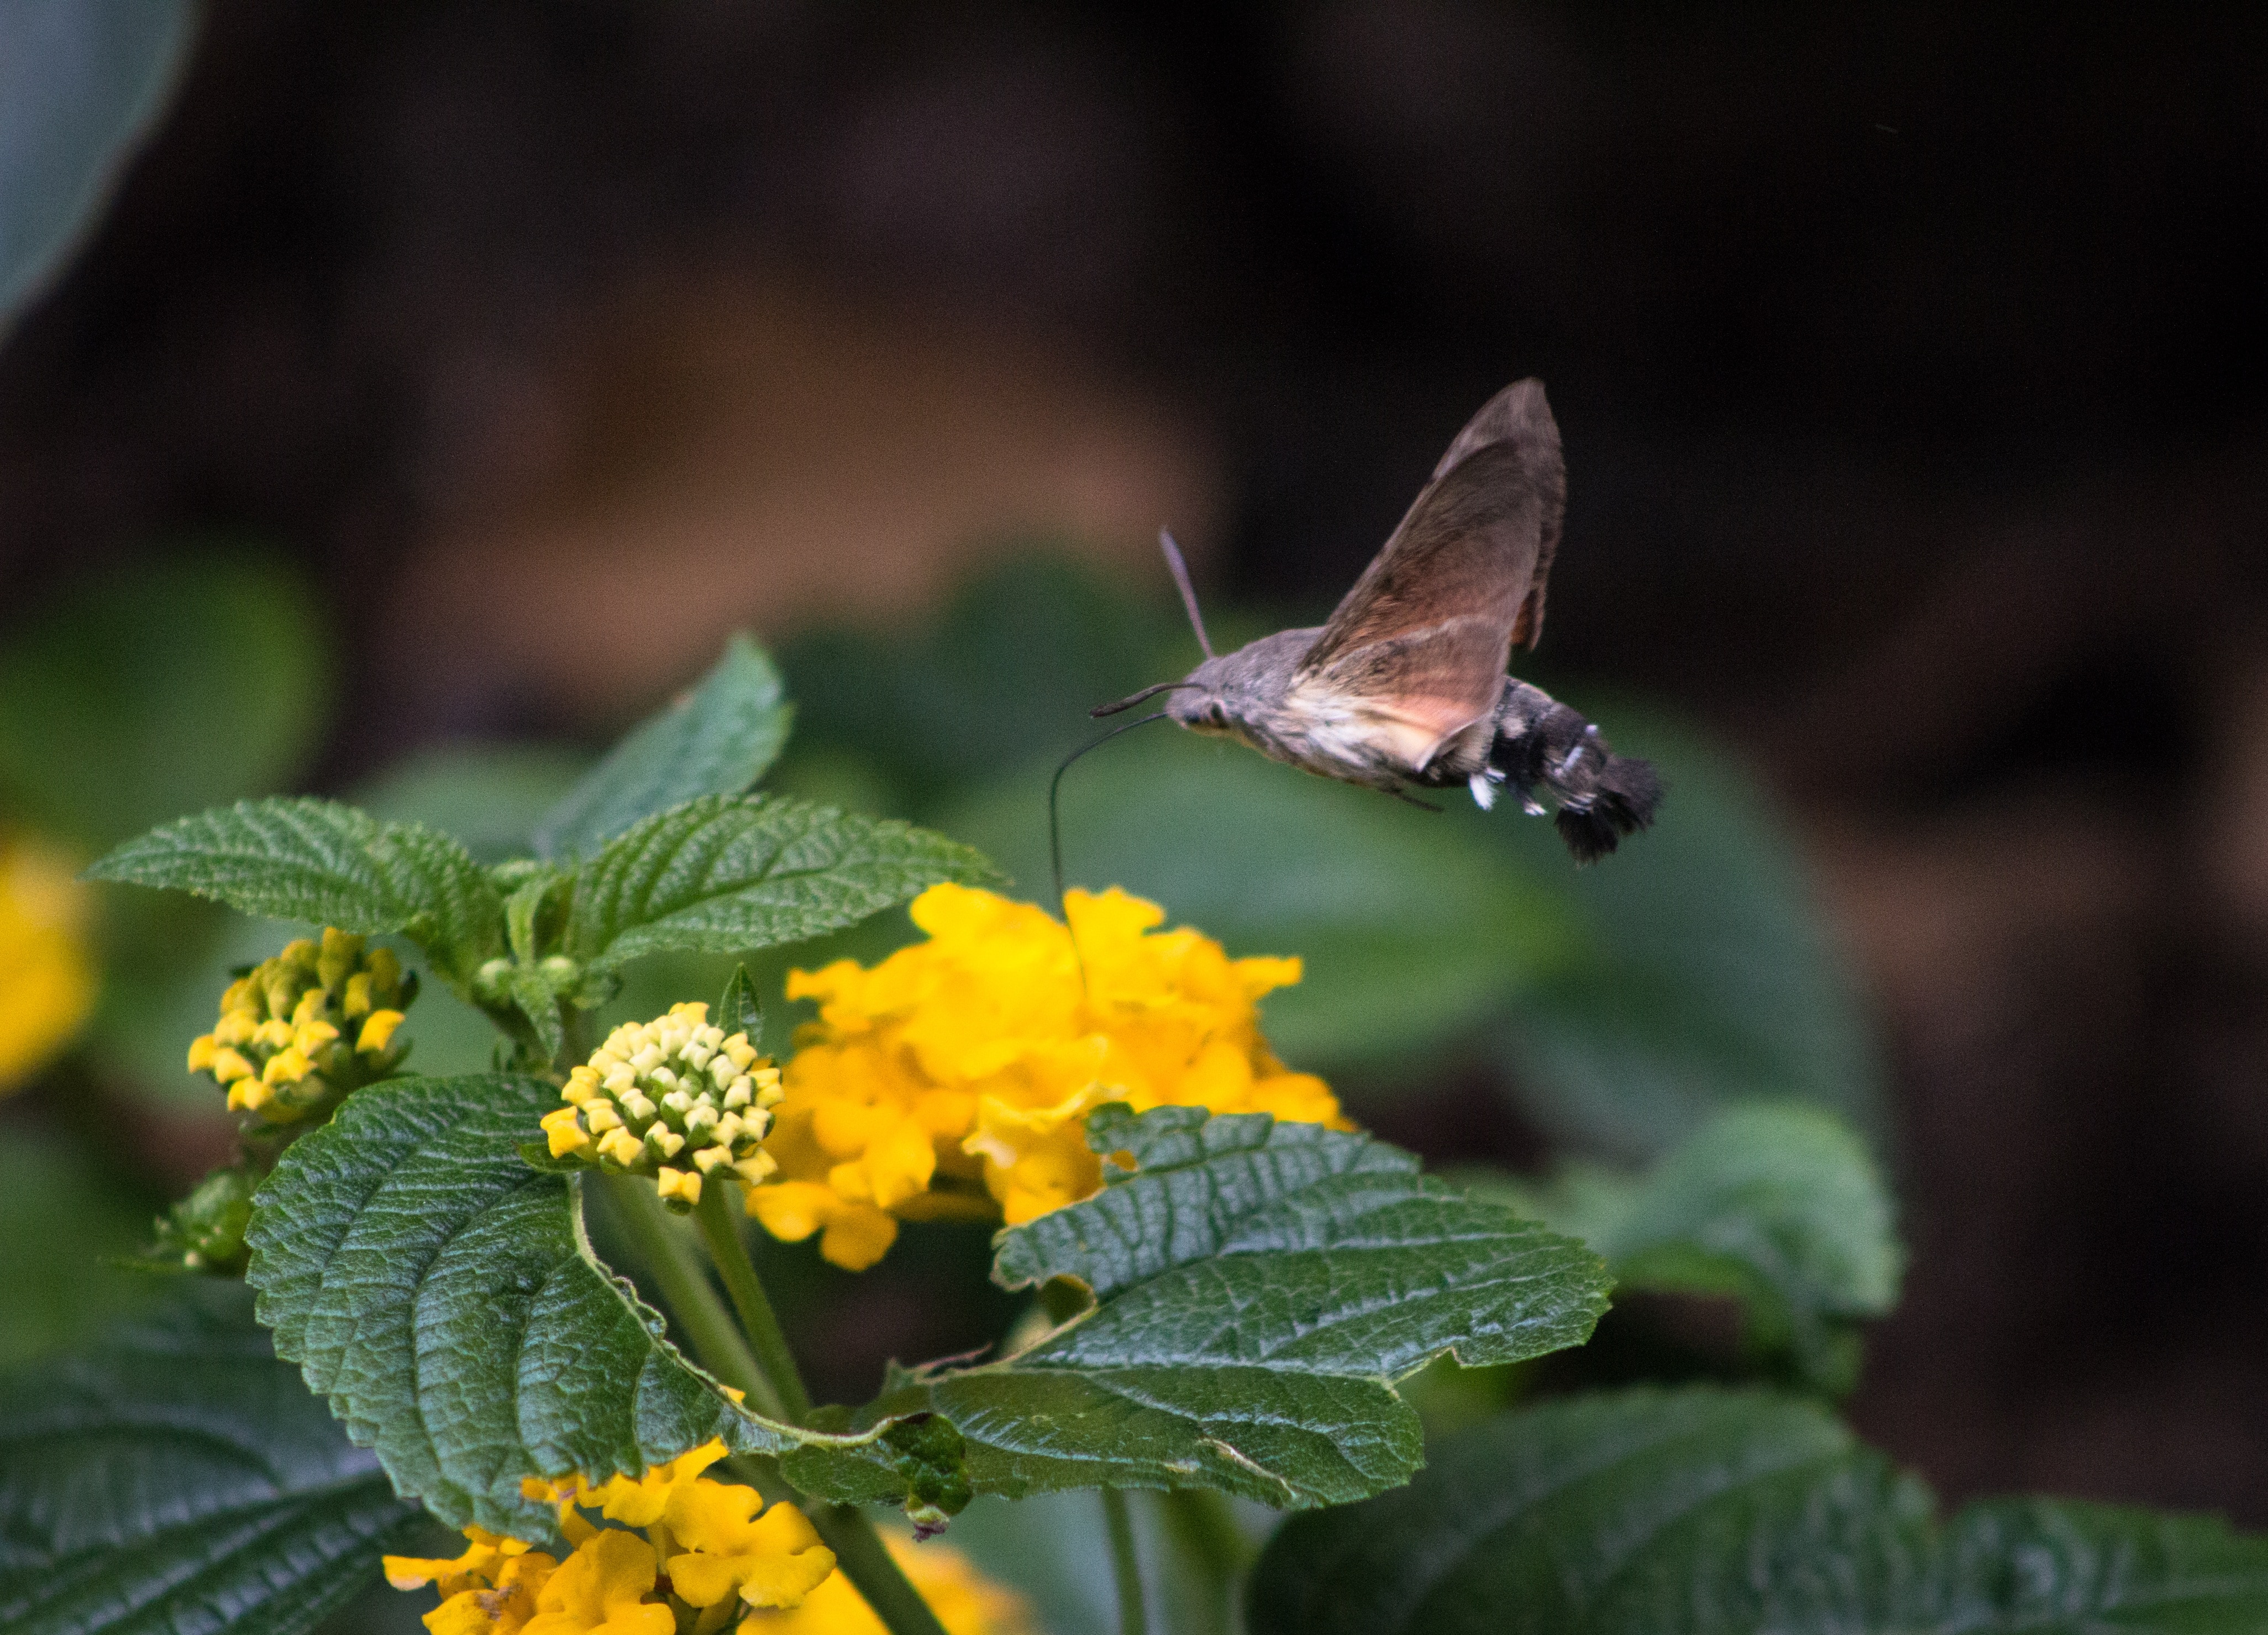 brown and black butterfly flying near yellow flowers